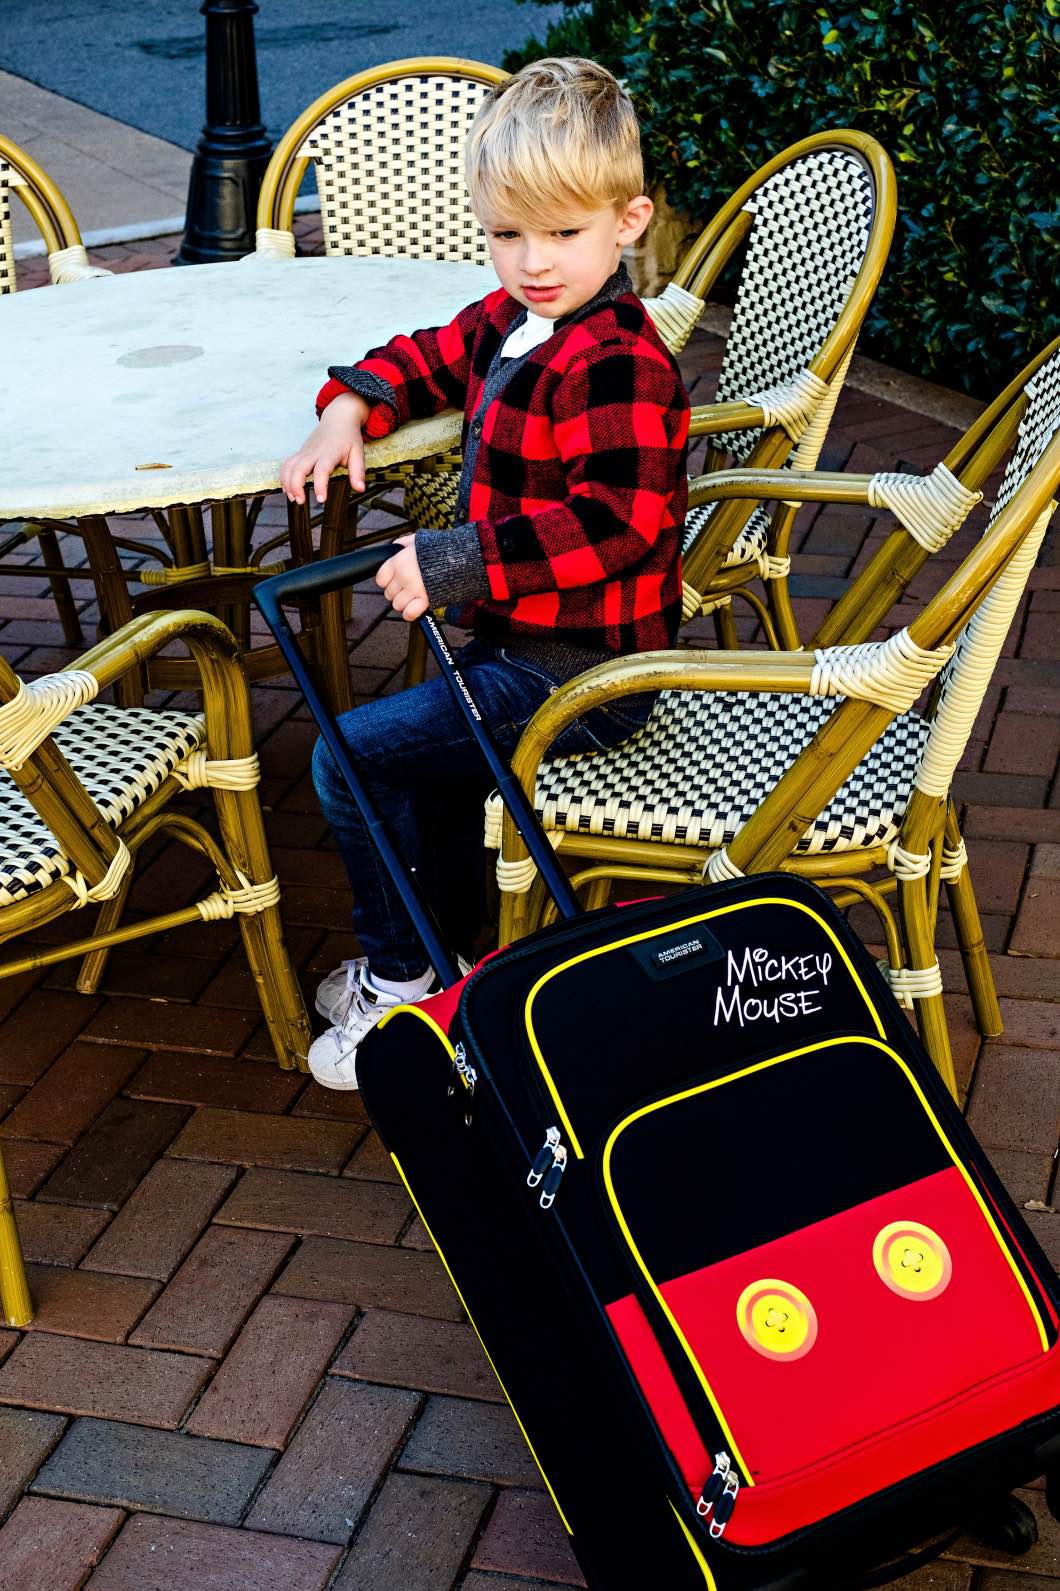 Flying with Children - What to Pack by Atlanta mom blogger Happily Hughes